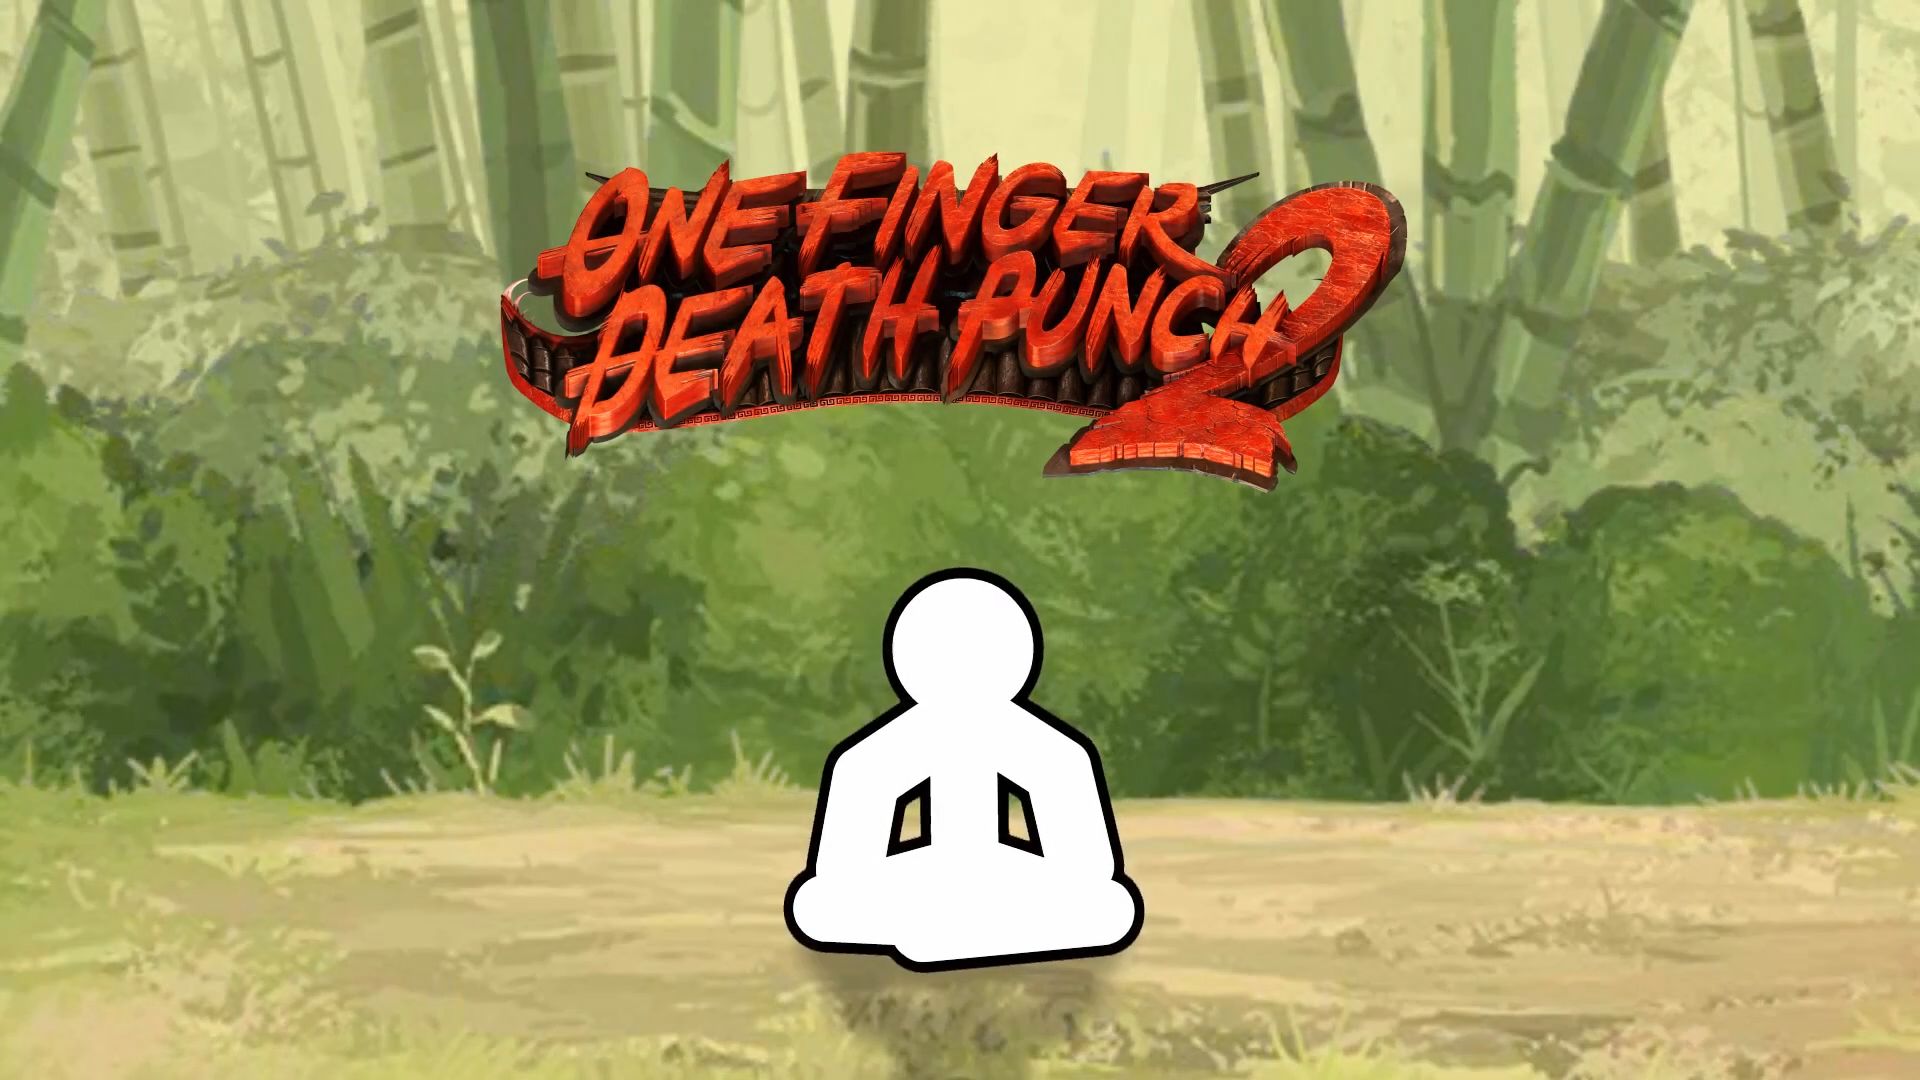 Download One Finger Death Punch 2 Android free game.